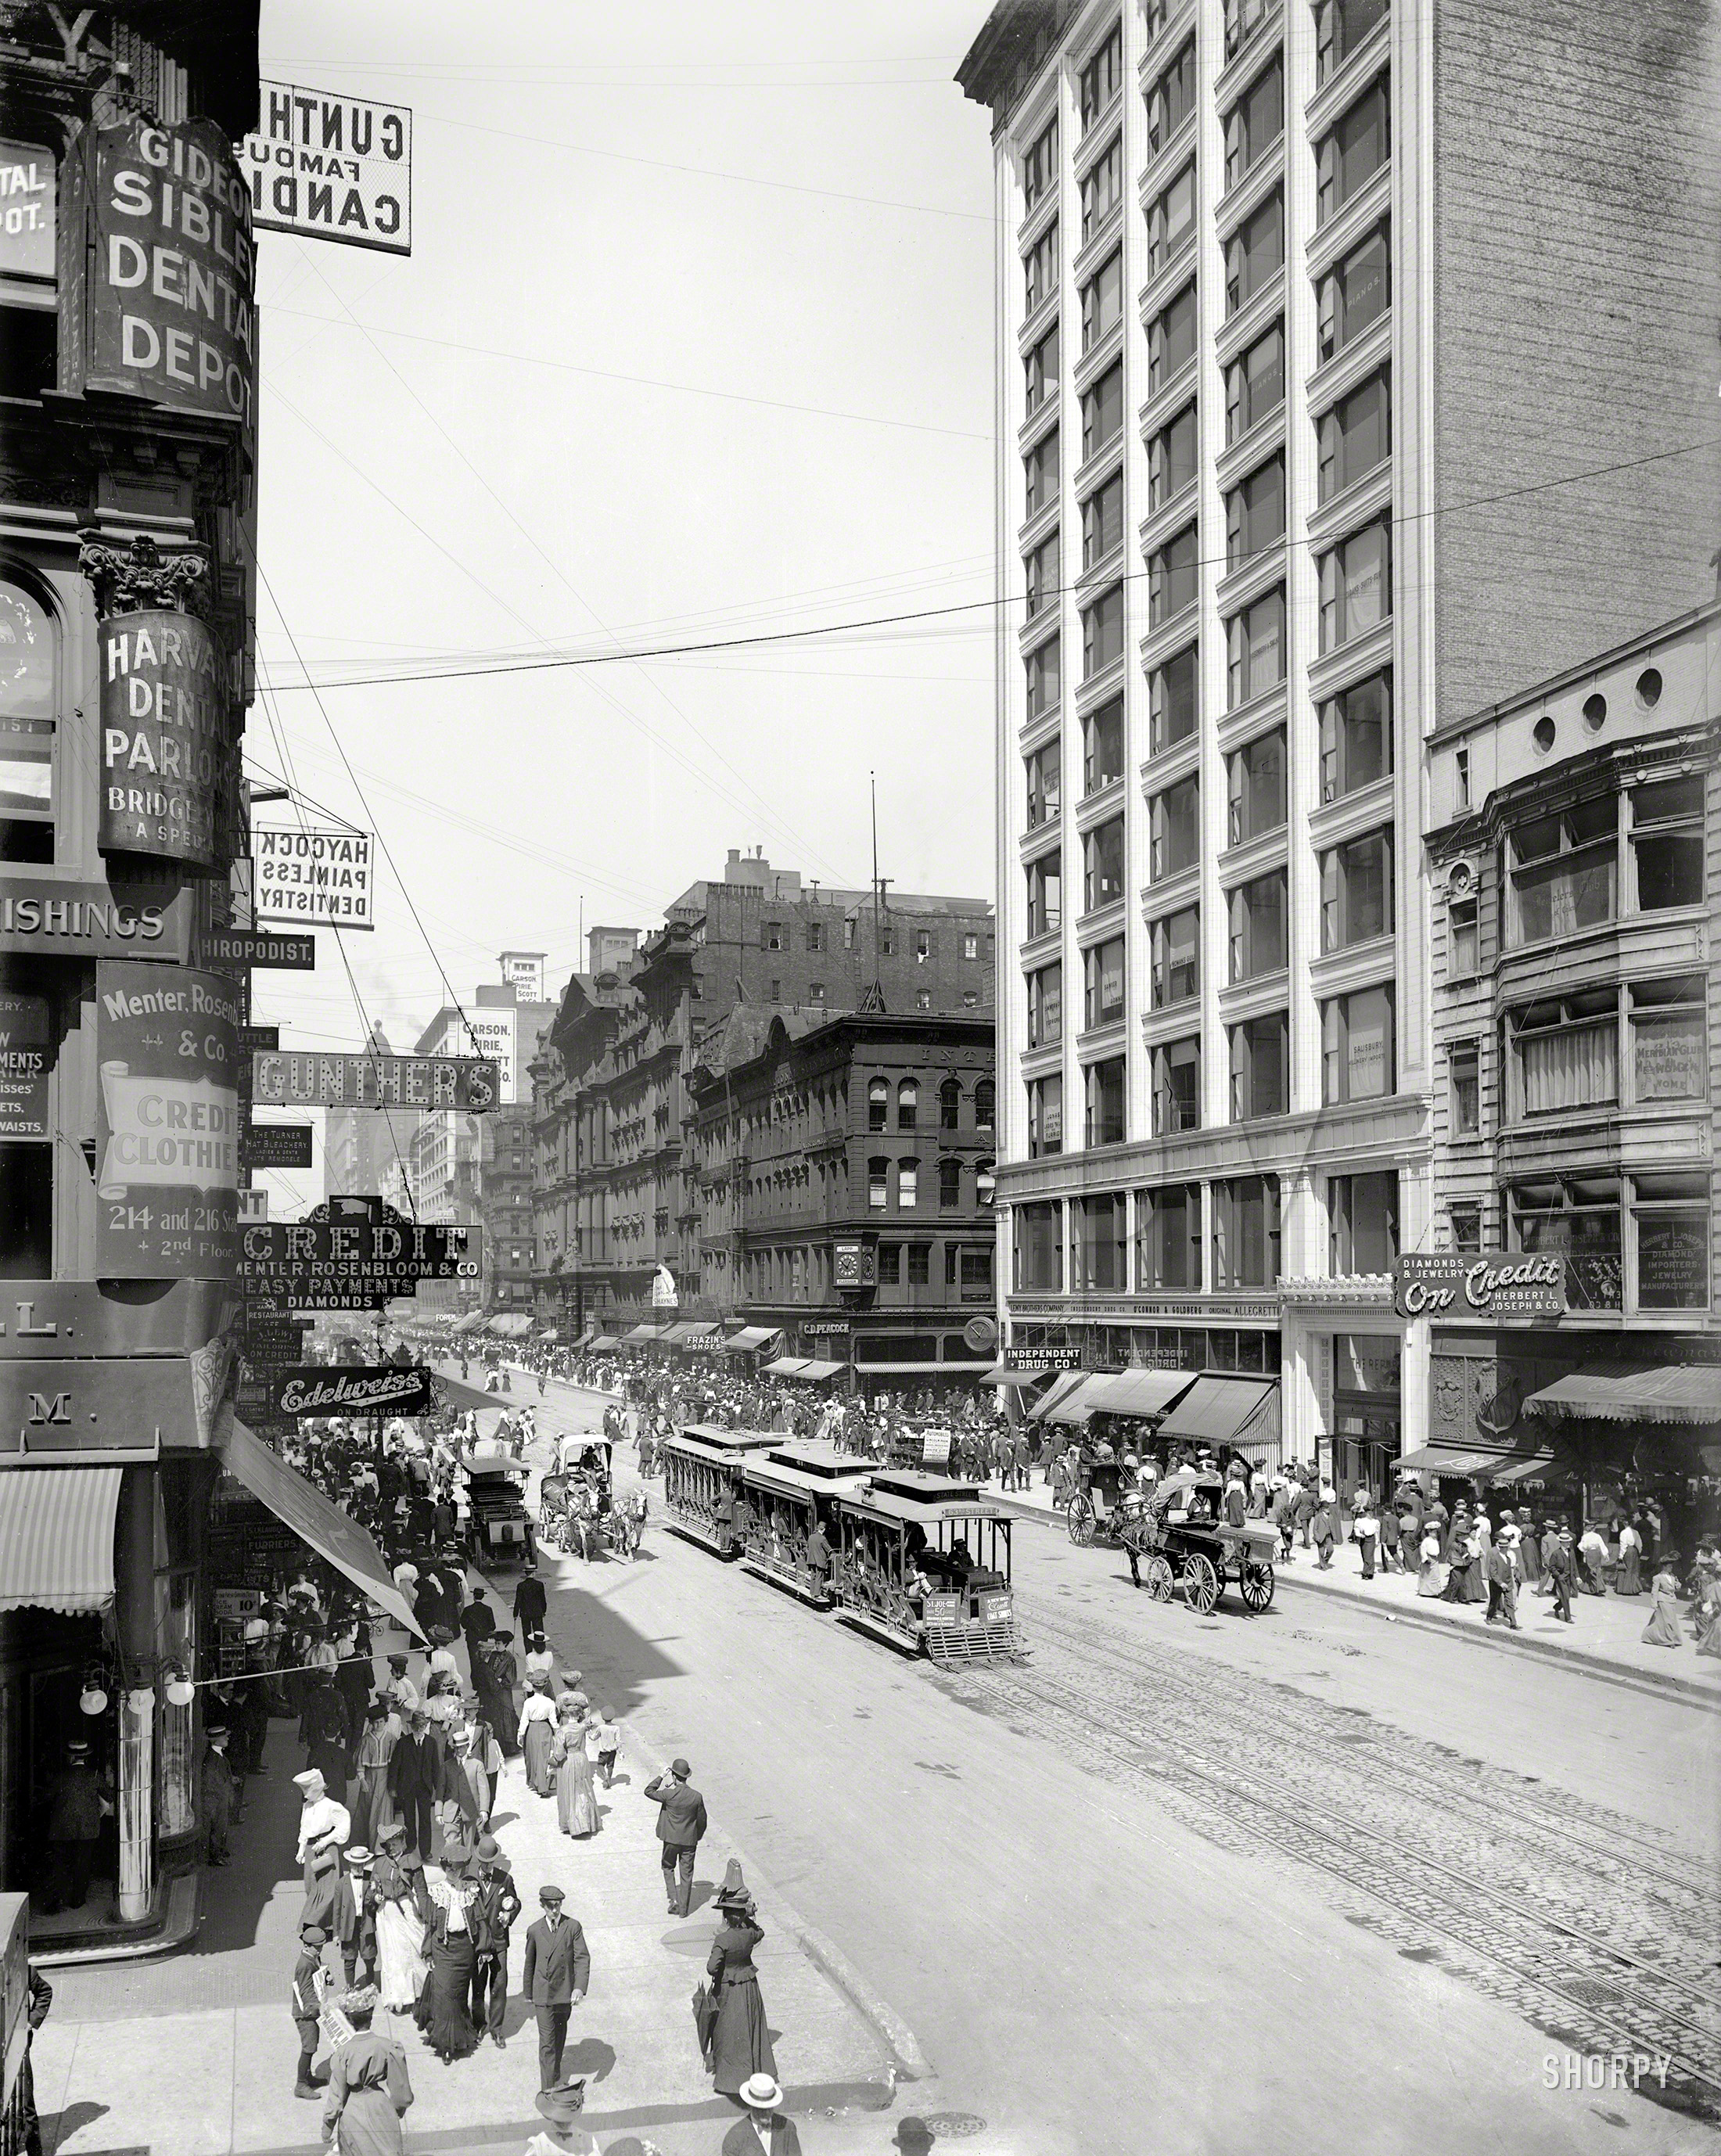 November 27, 1905. "Chicago -- State Street looking toward Adams." This dental nerve center of the Windy City advertises the services of Haycock Painless Dentistry, the Harvard Dental Parlors and, not to be outdone in branding, the Gideon Sibley Dental Depot. 8x10 inch dry plate glass negative. View full size.